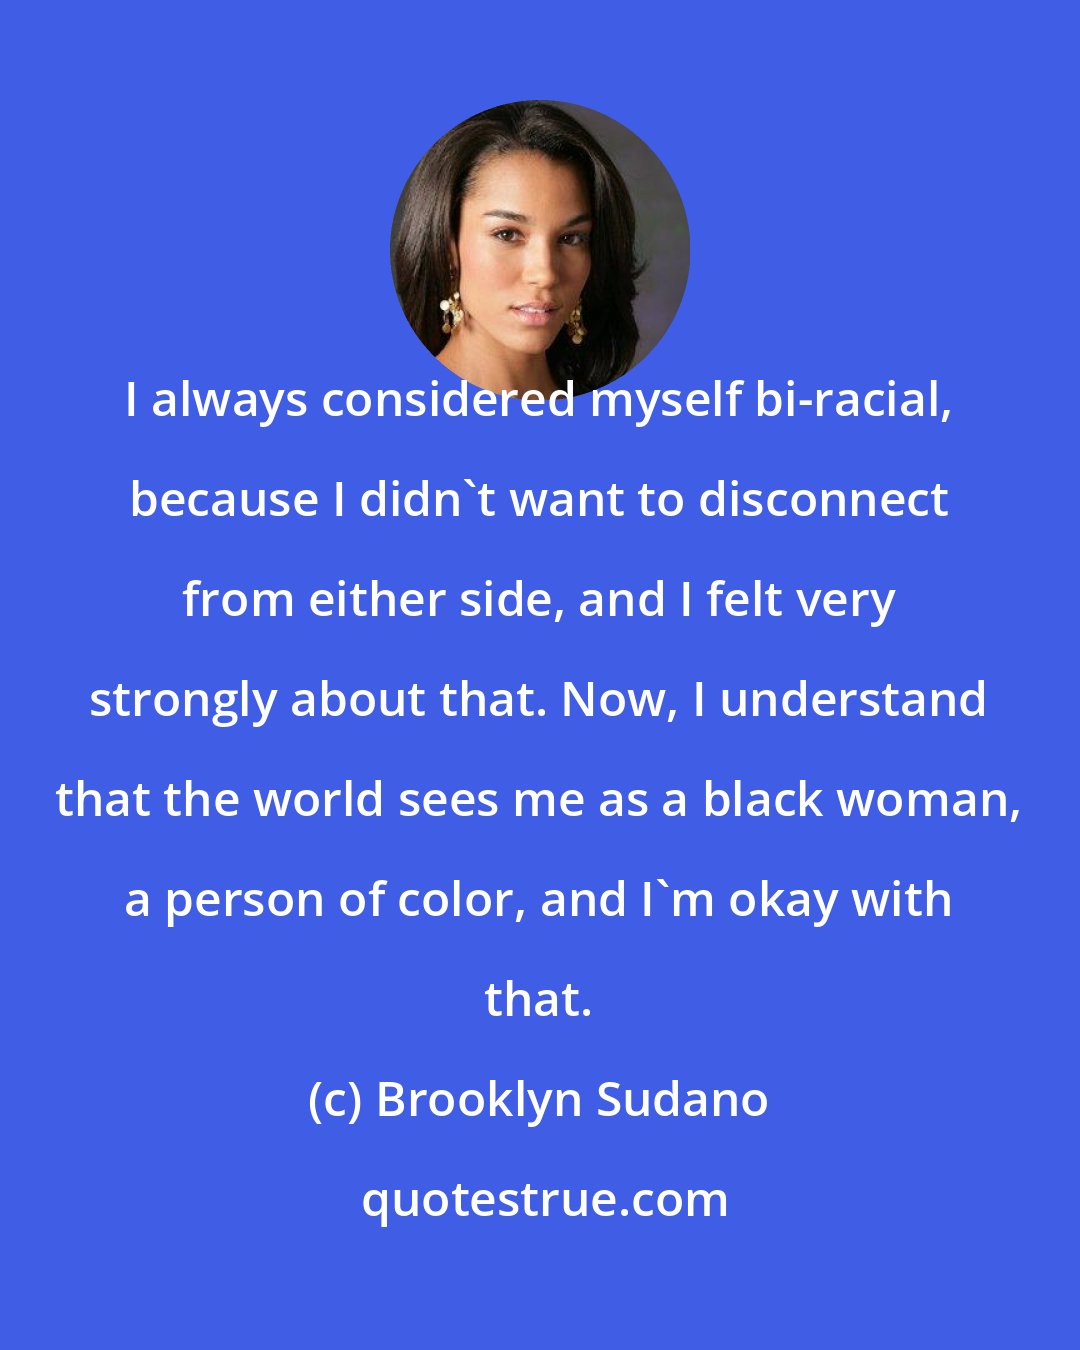 Brooklyn Sudano: I always considered myself bi-racial, because I didn't want to disconnect from either side, and I felt very strongly about that. Now, I understand that the world sees me as a black woman, a person of color, and I'm okay with that.